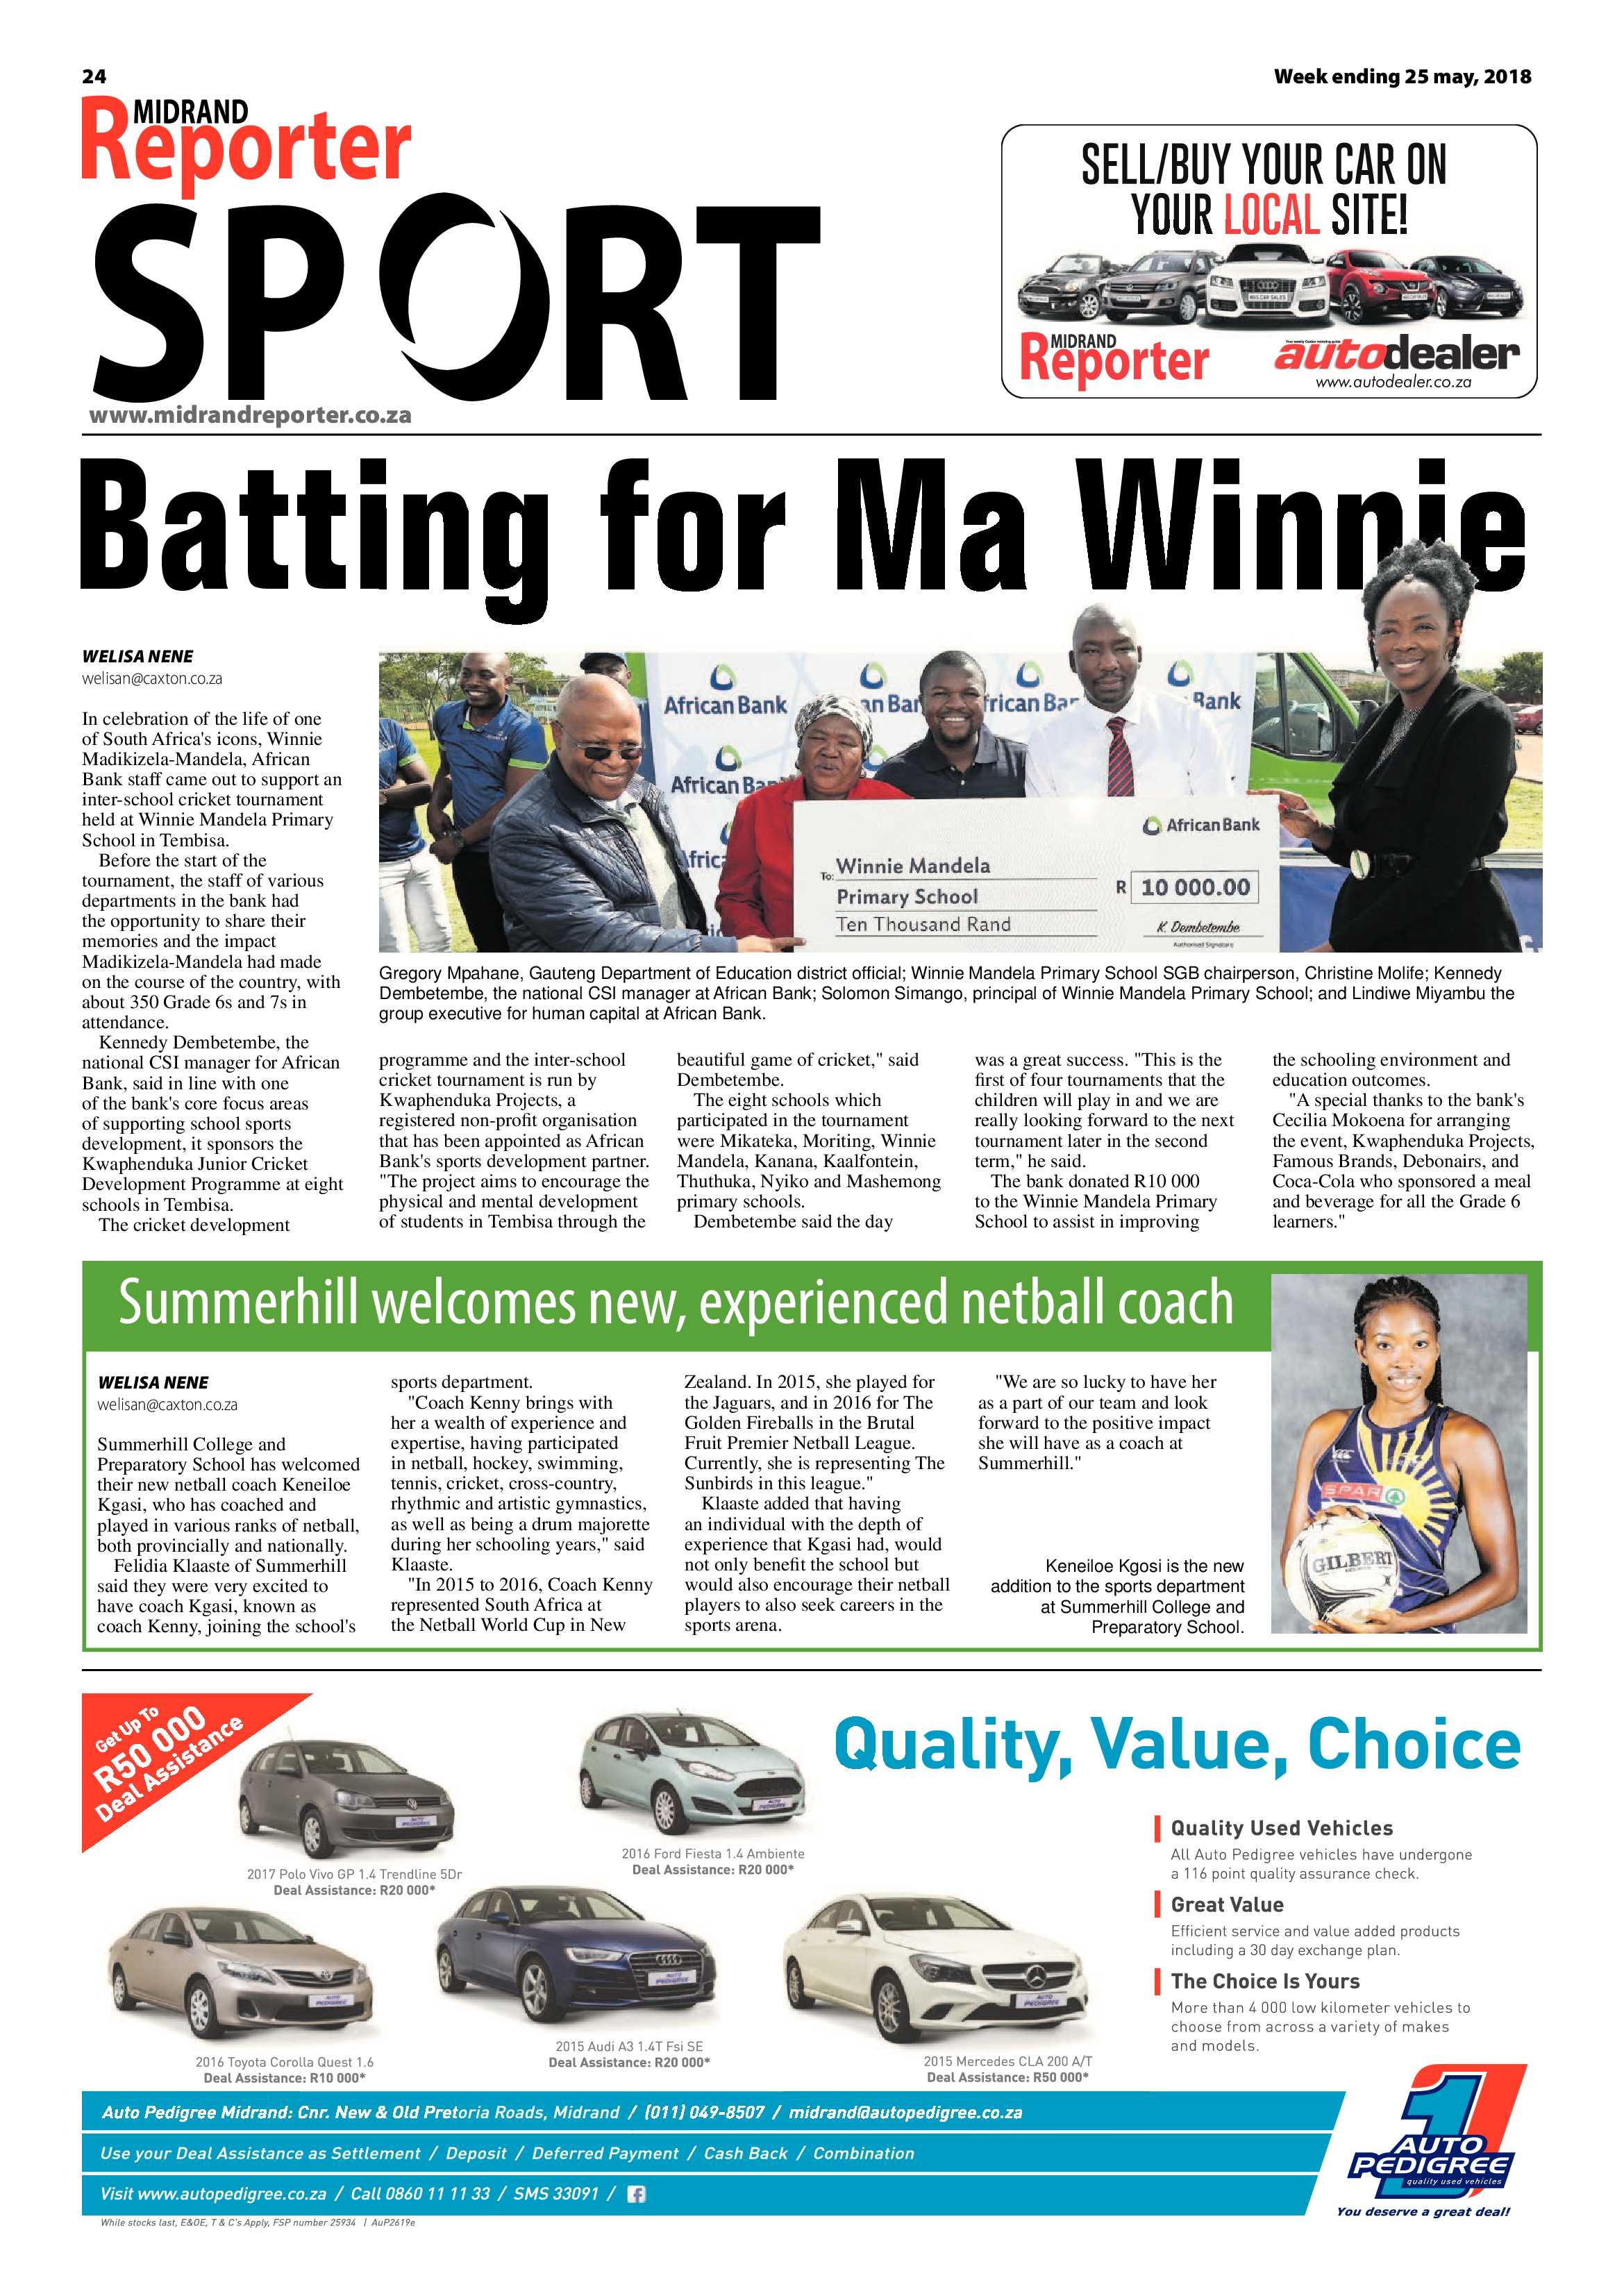 Midrand Reporter 25 May 2018 page 24